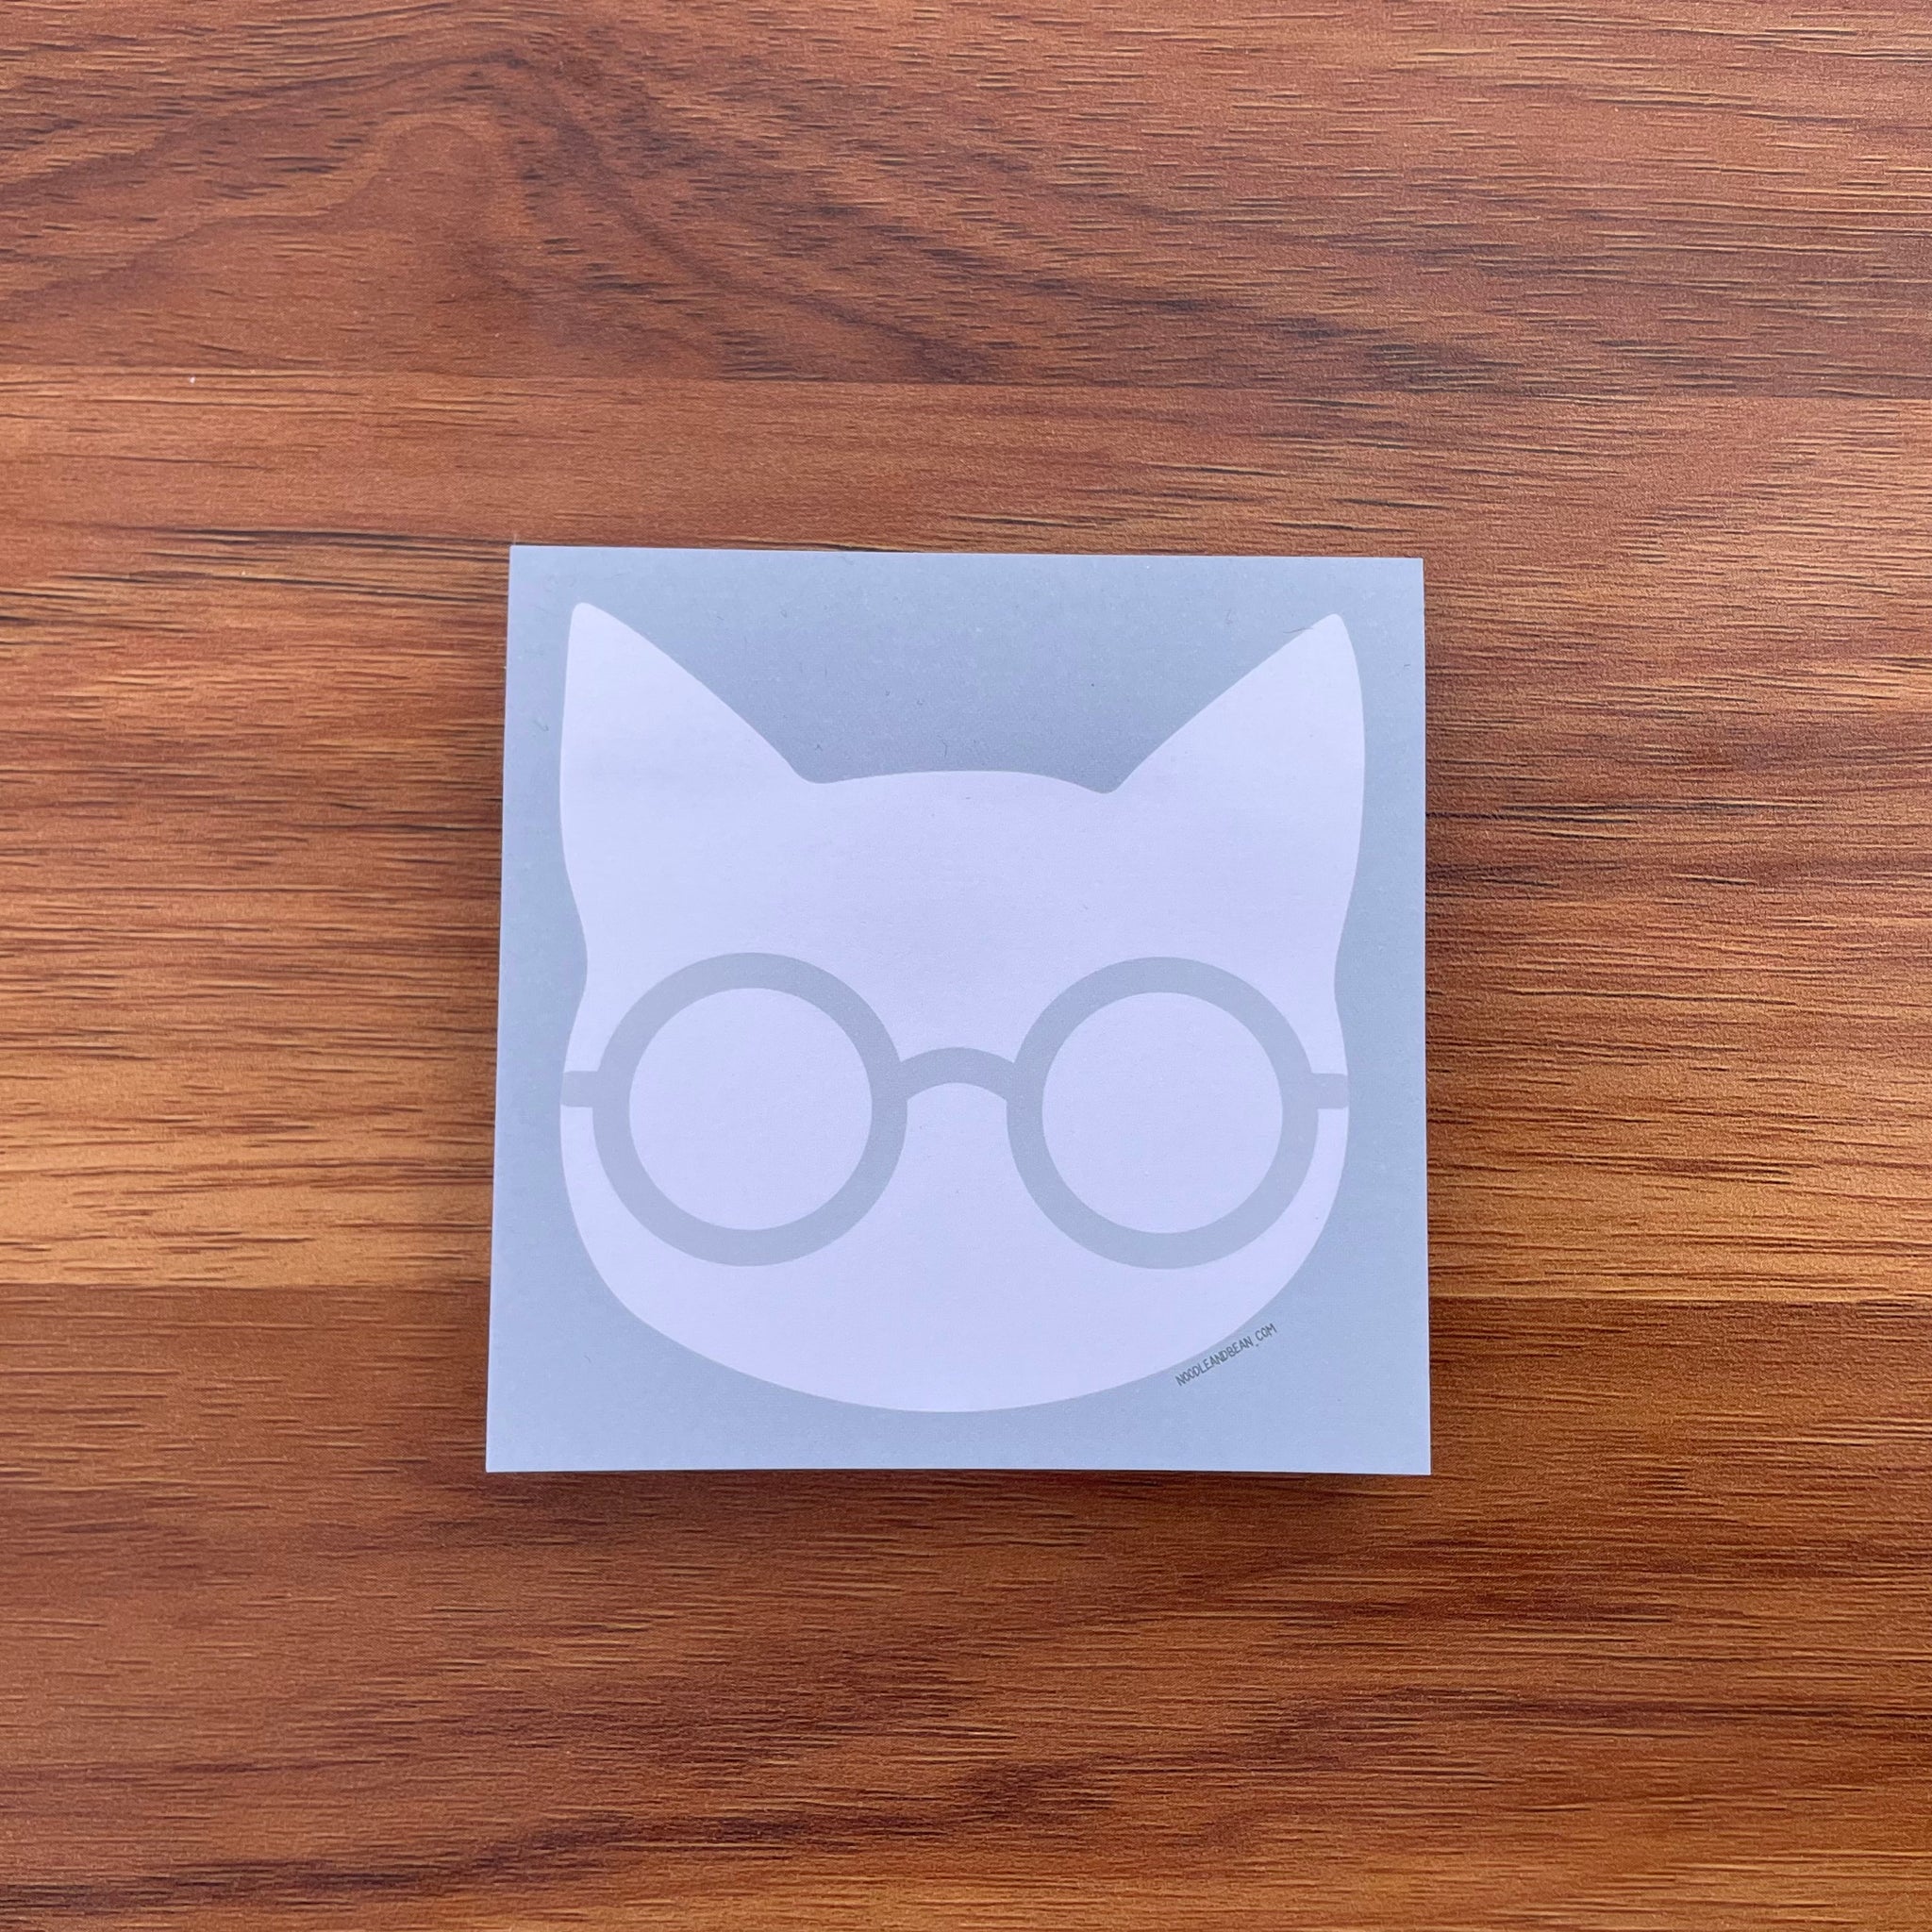 OOPSIE - Cat Head Sticky Notes - Pointy Ears with Glasses